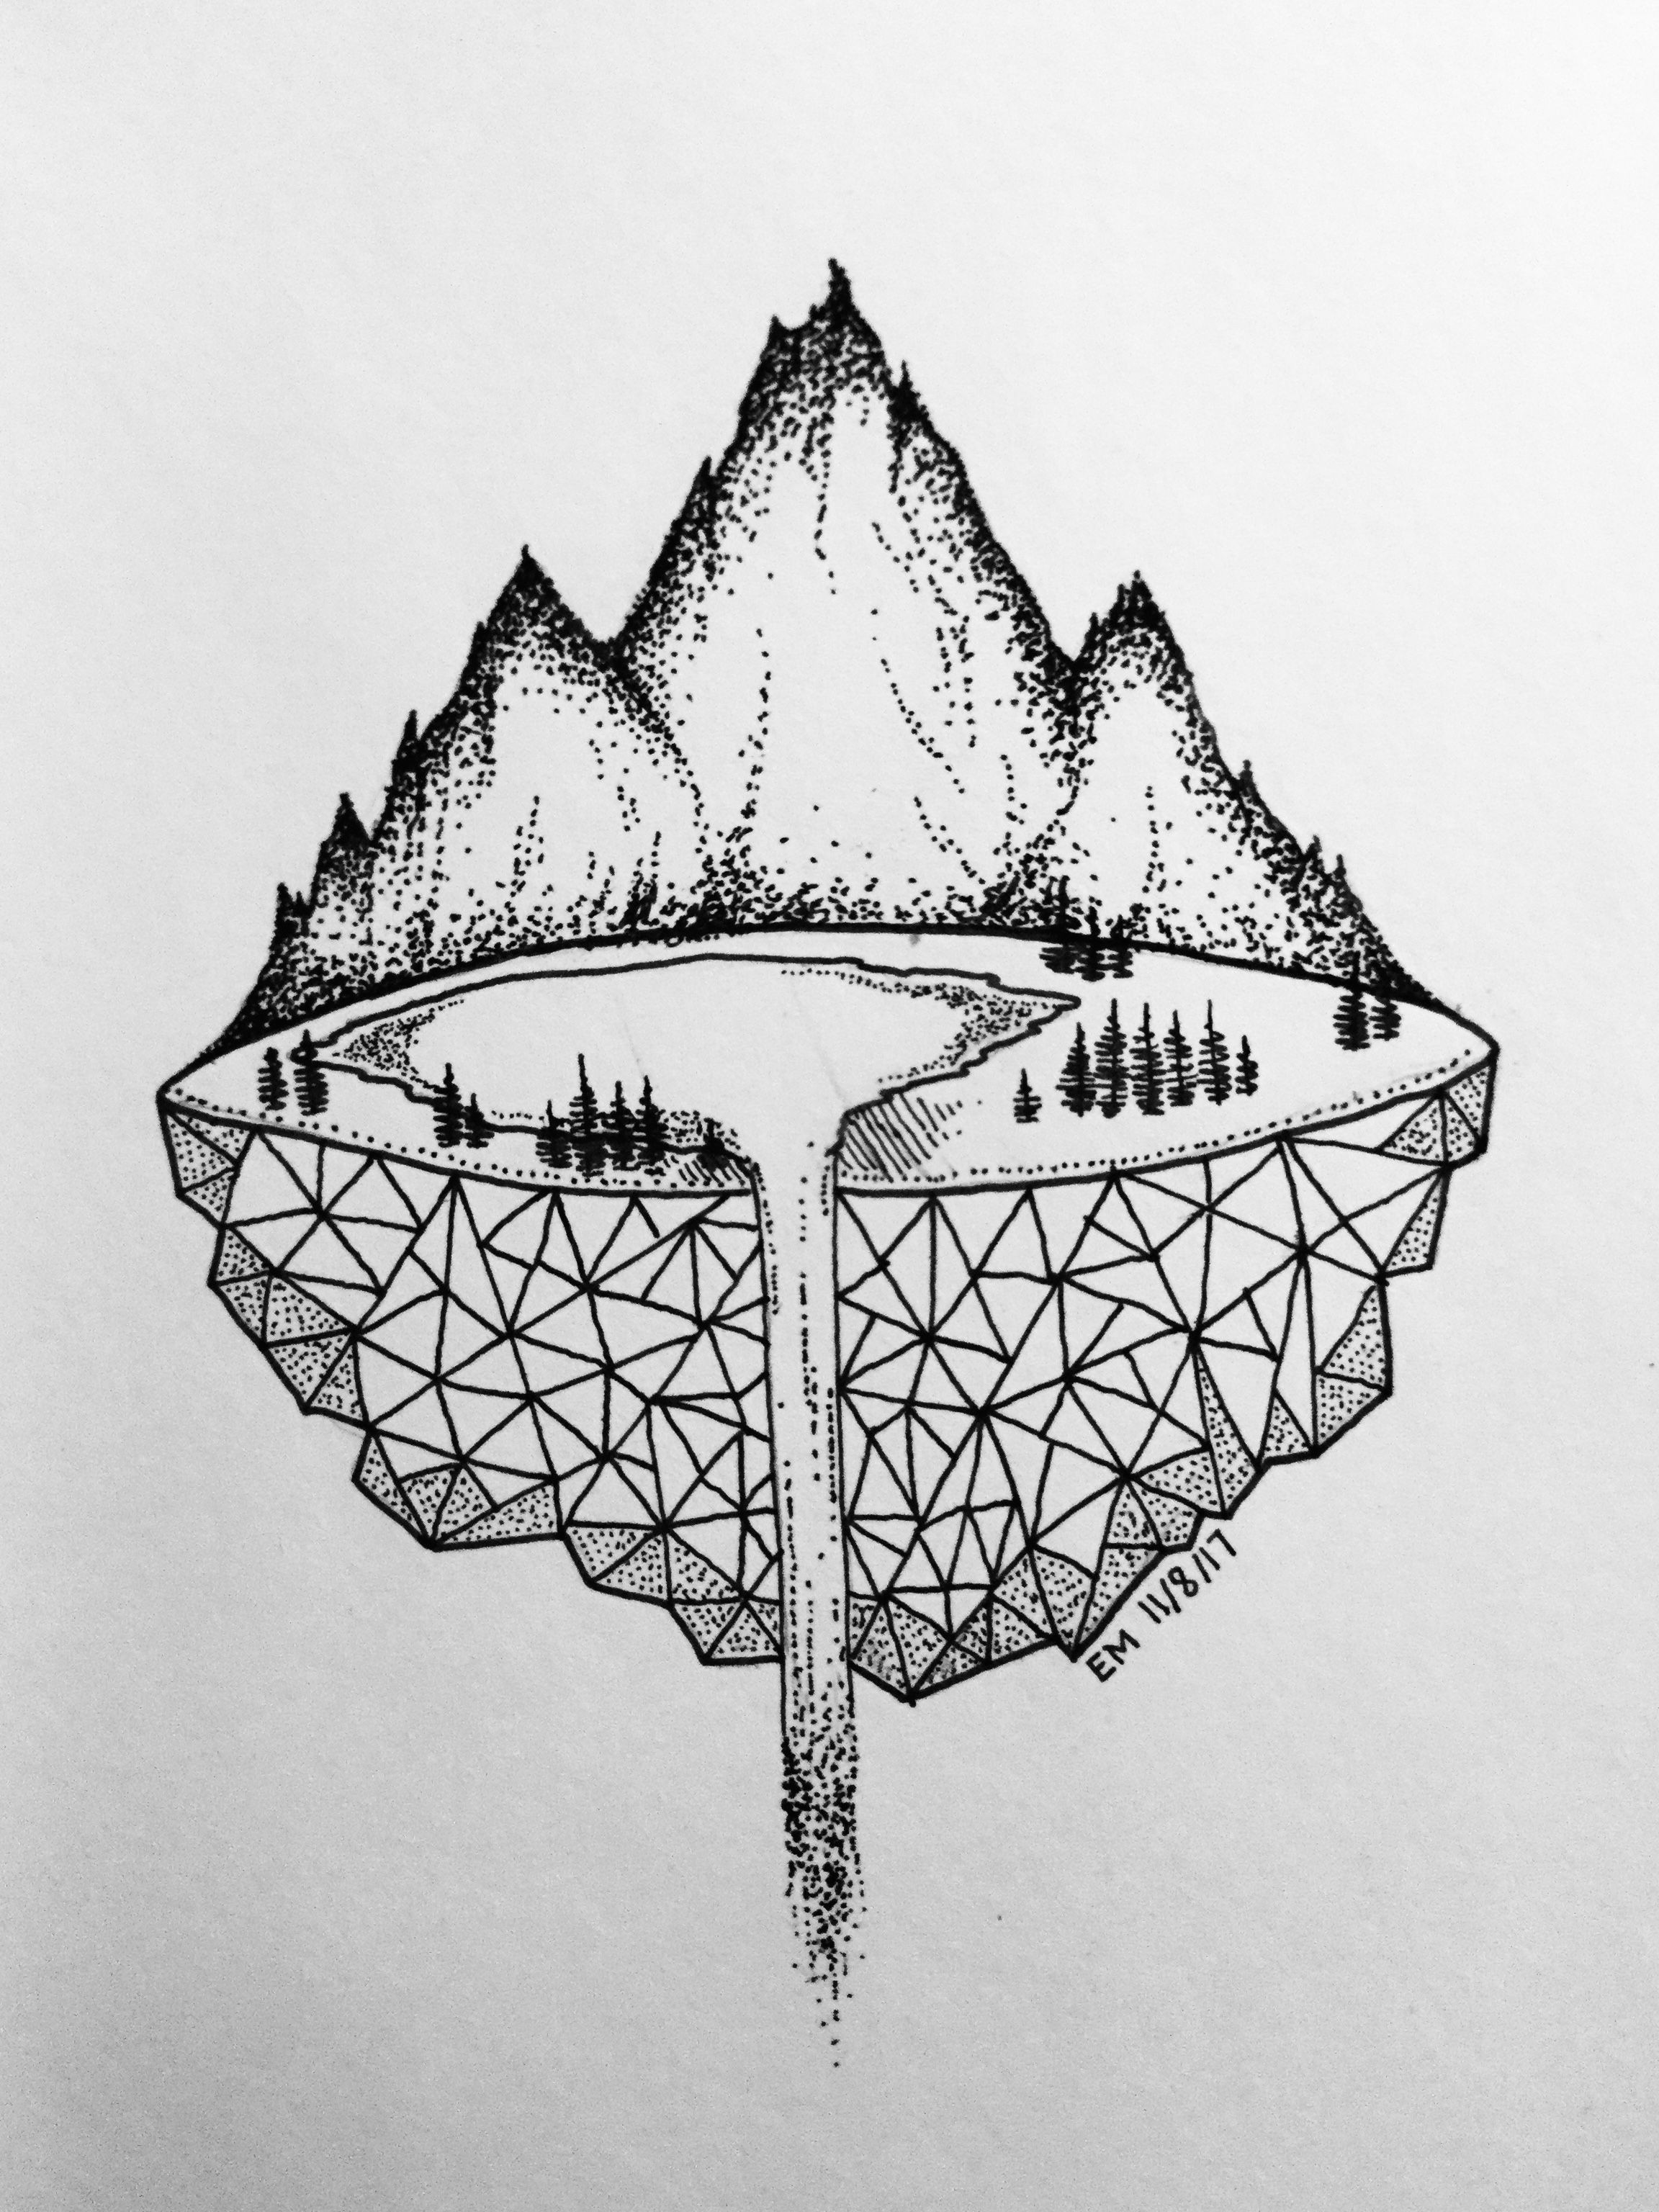 Drawing Ideas Mountains Micron Mountains Tattoo Ideas Drawings Art Art Drawings